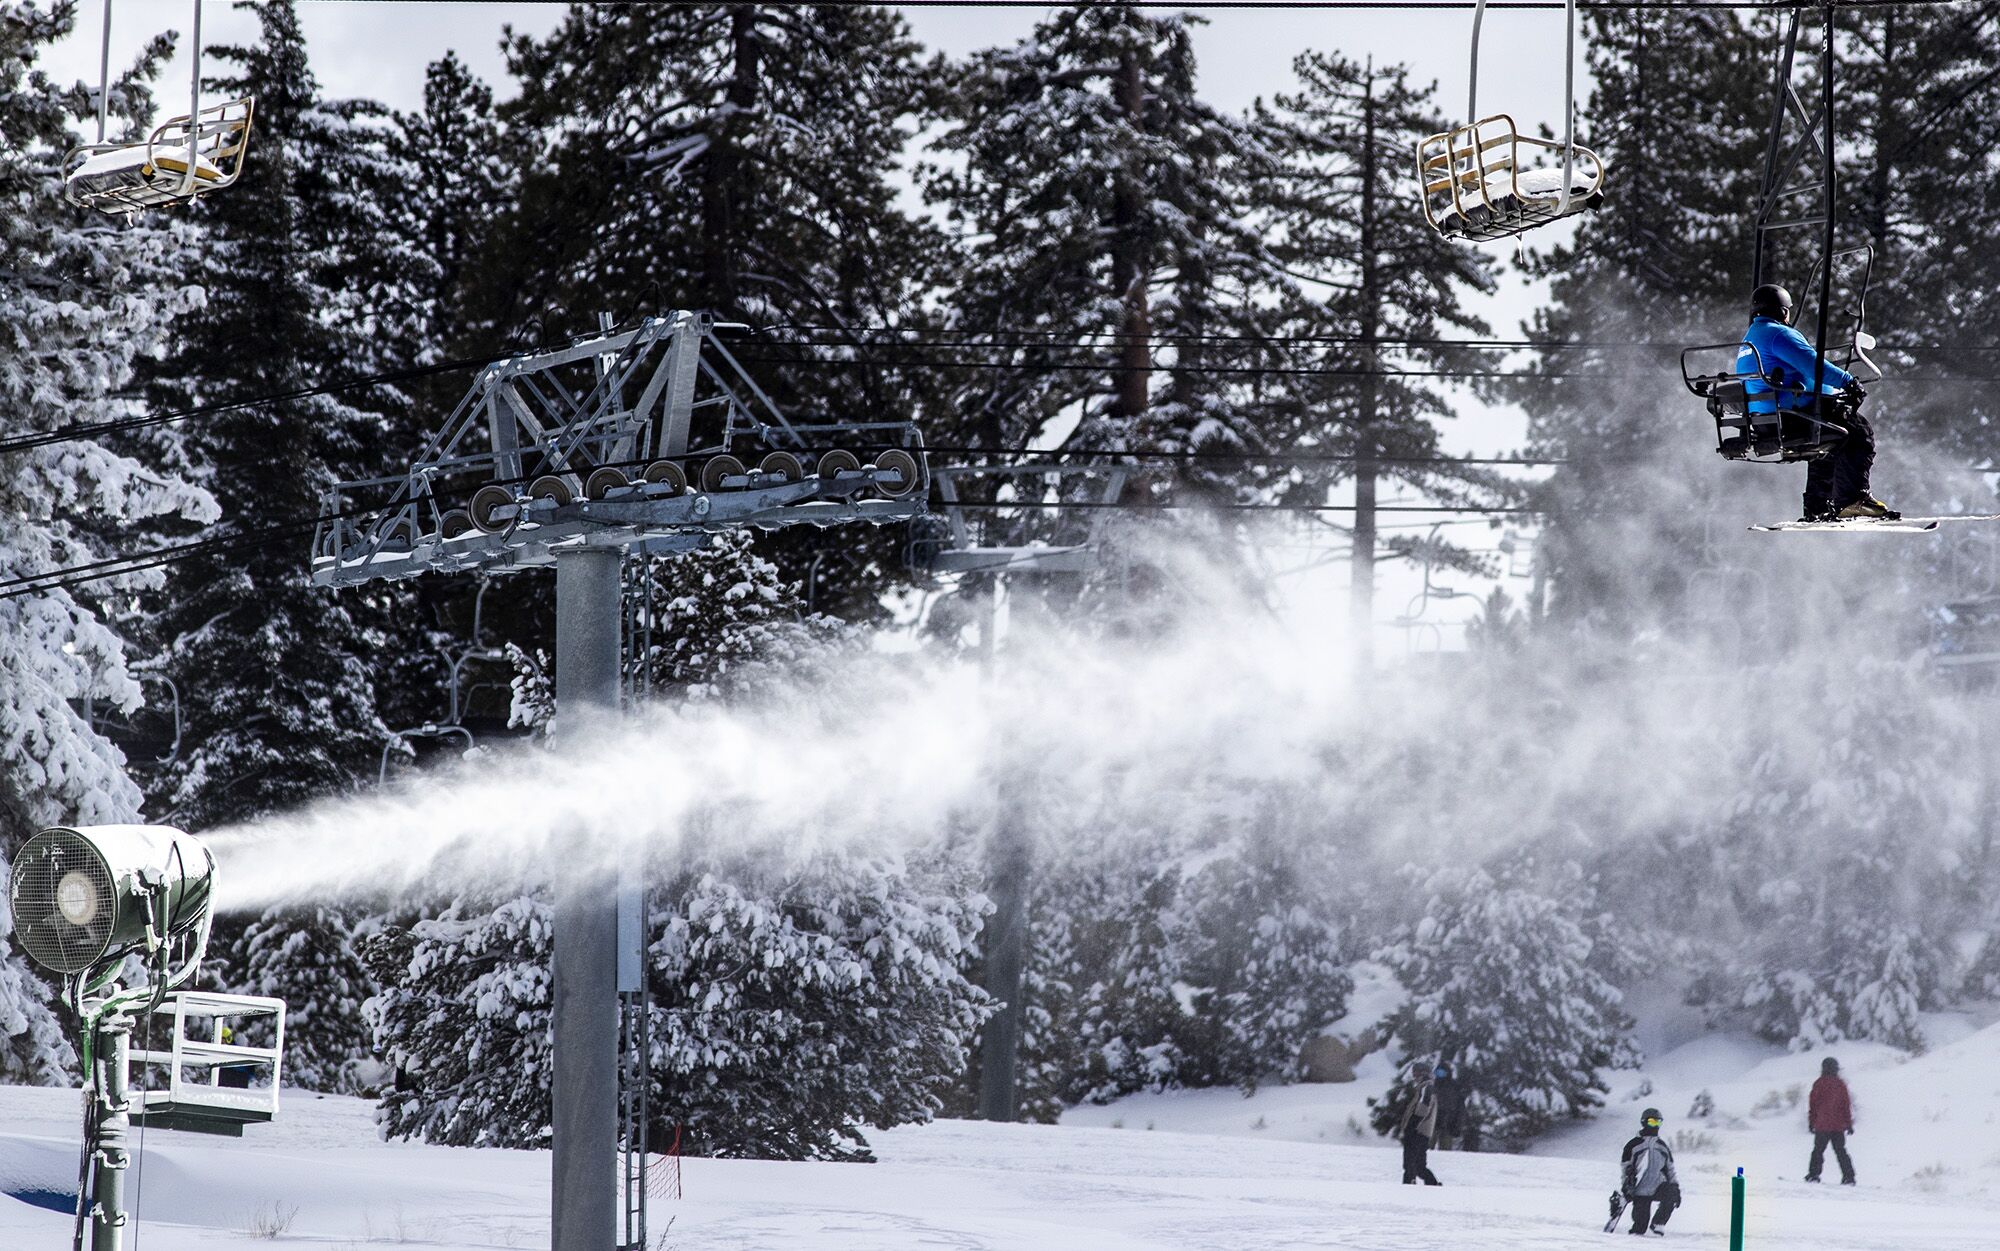 Man-made snow augments fresh snow at Snow Valley Mountain Resort in Running Springs, Calif.